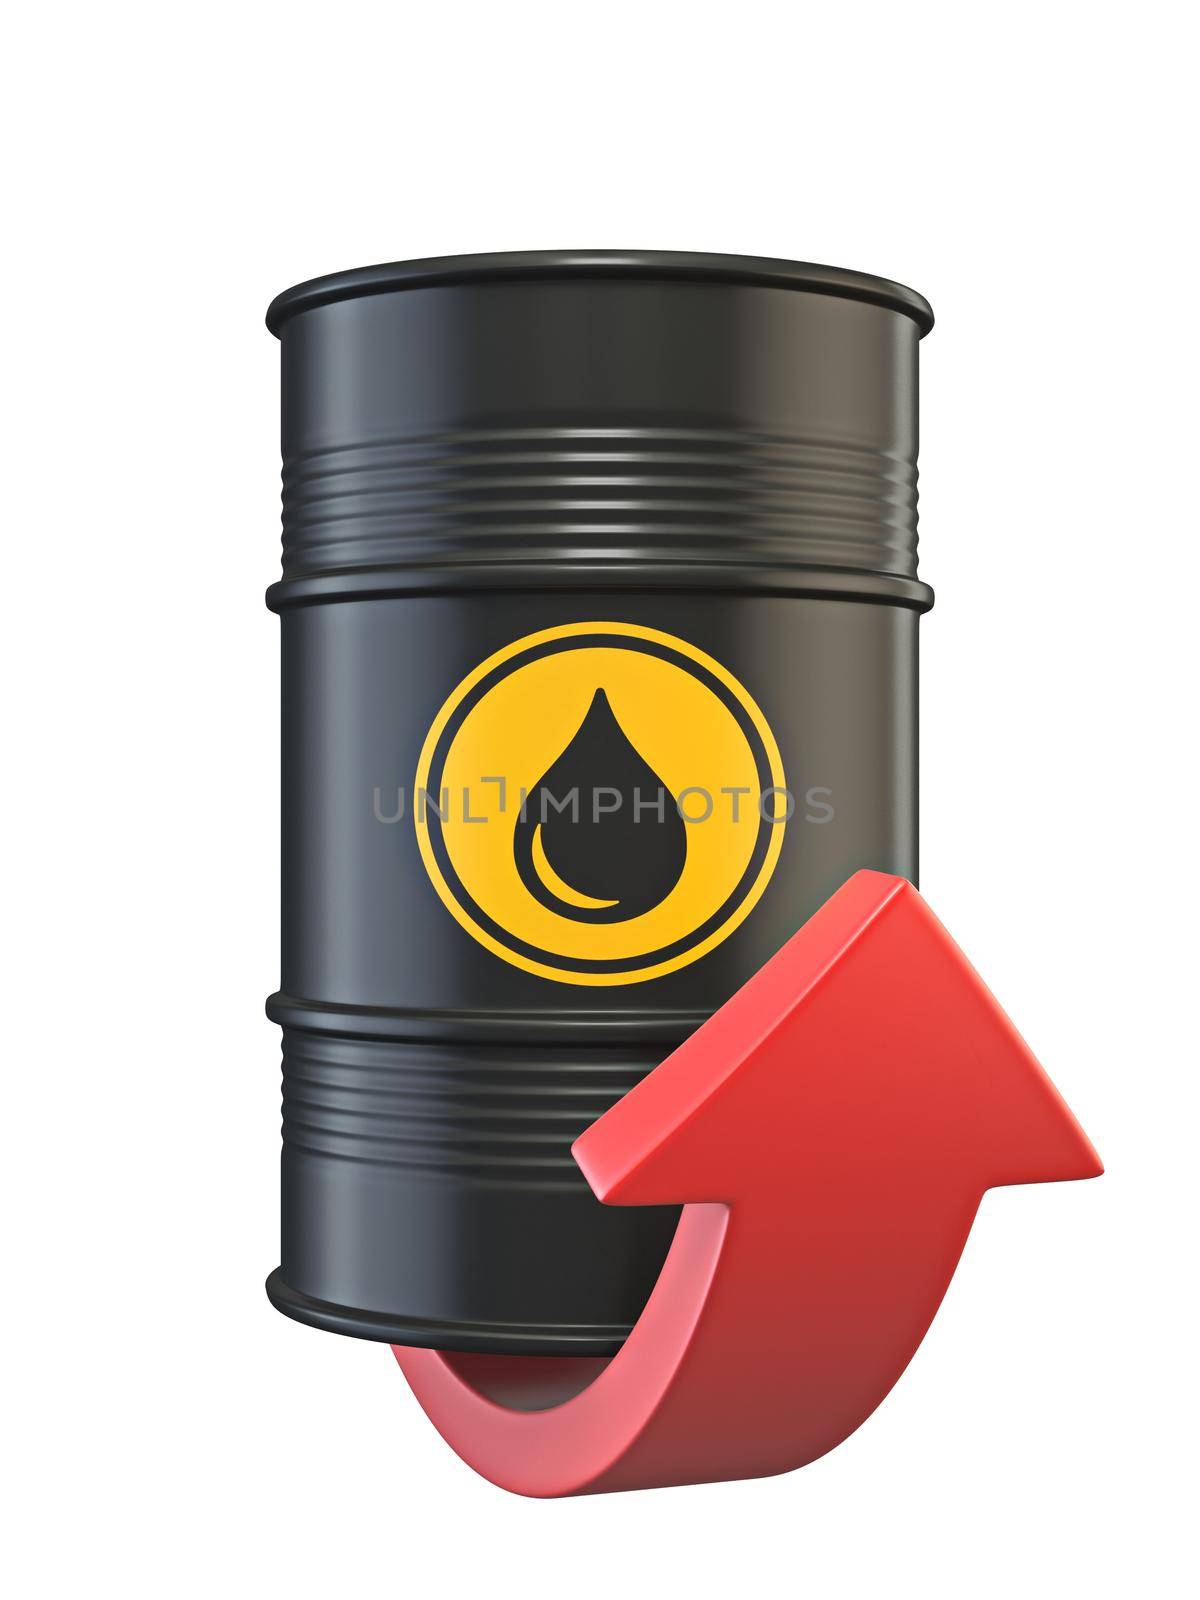 Oil barrel with red arrow 3D rendering illustration isolated on white background